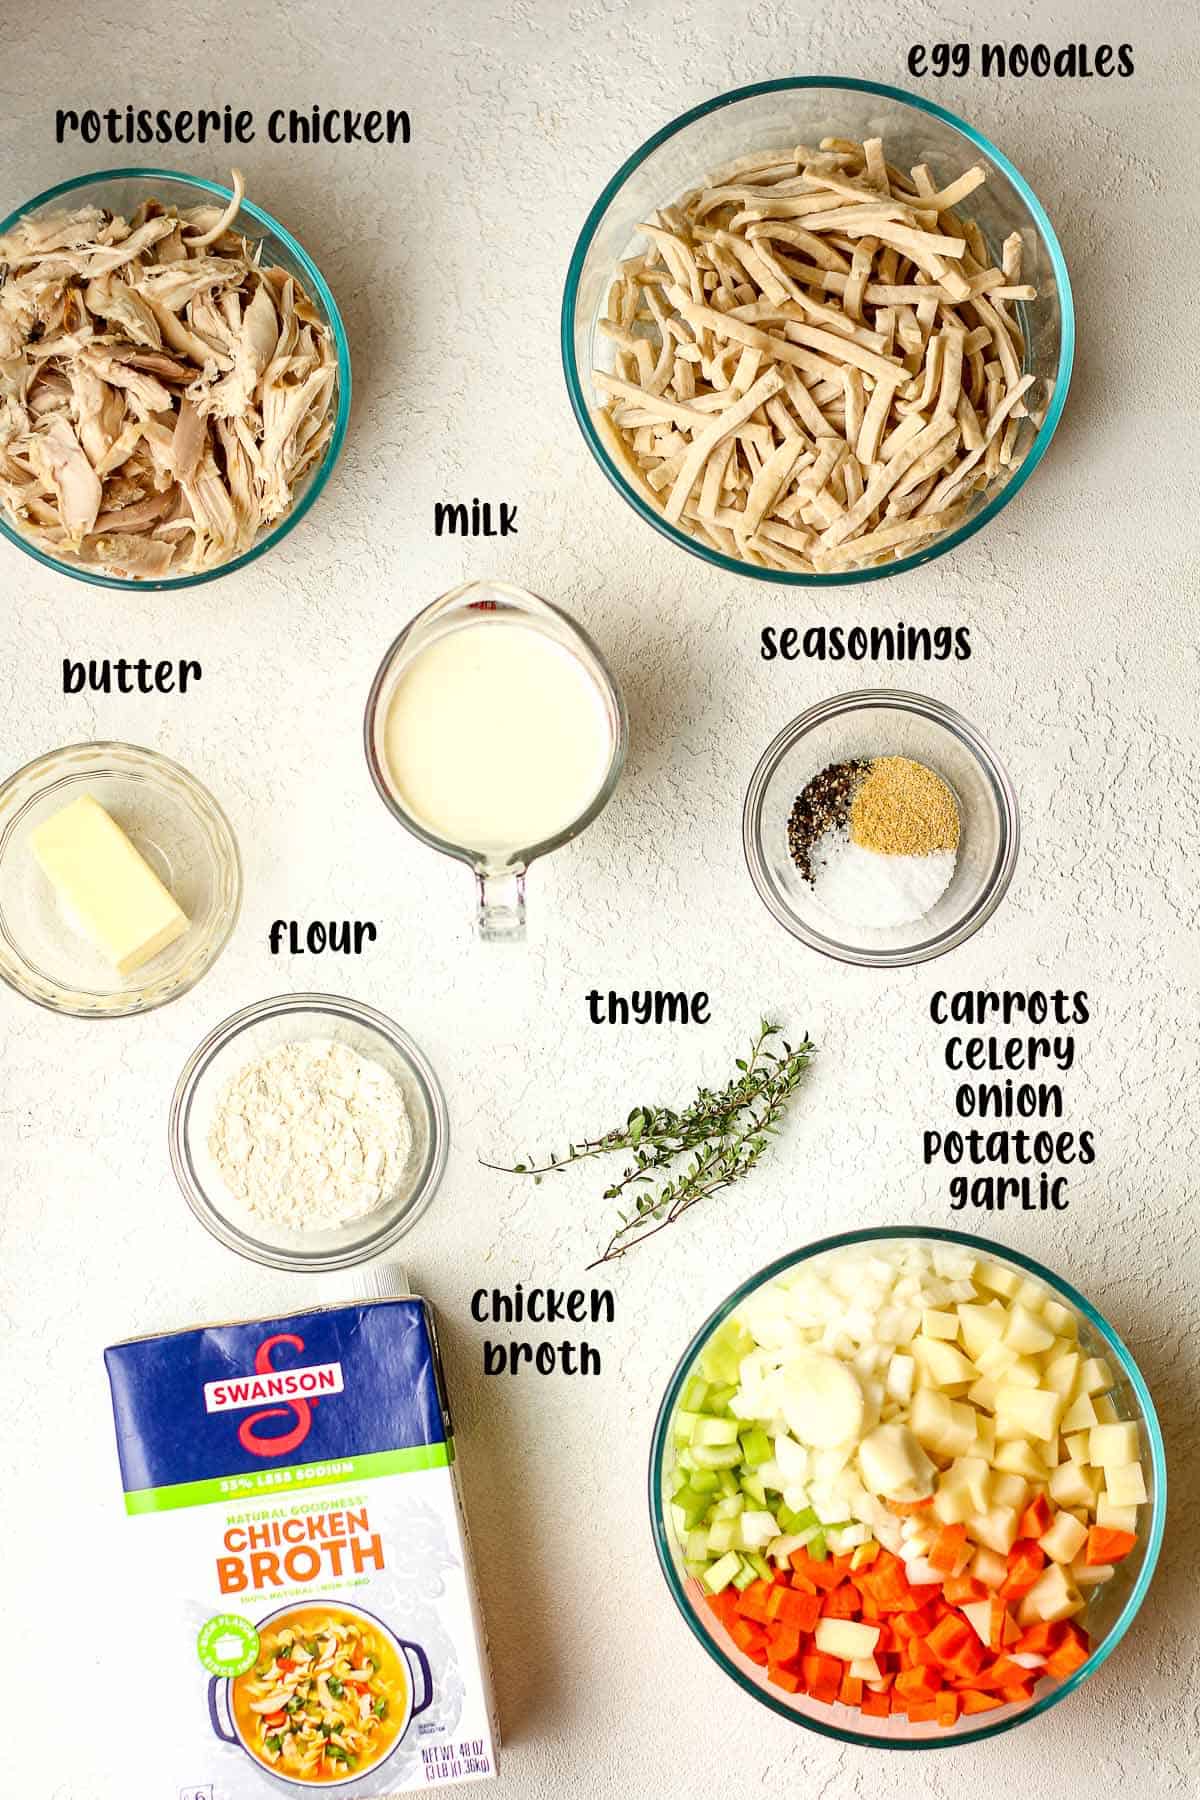 Ingredients for creamy chicken noodle soup.